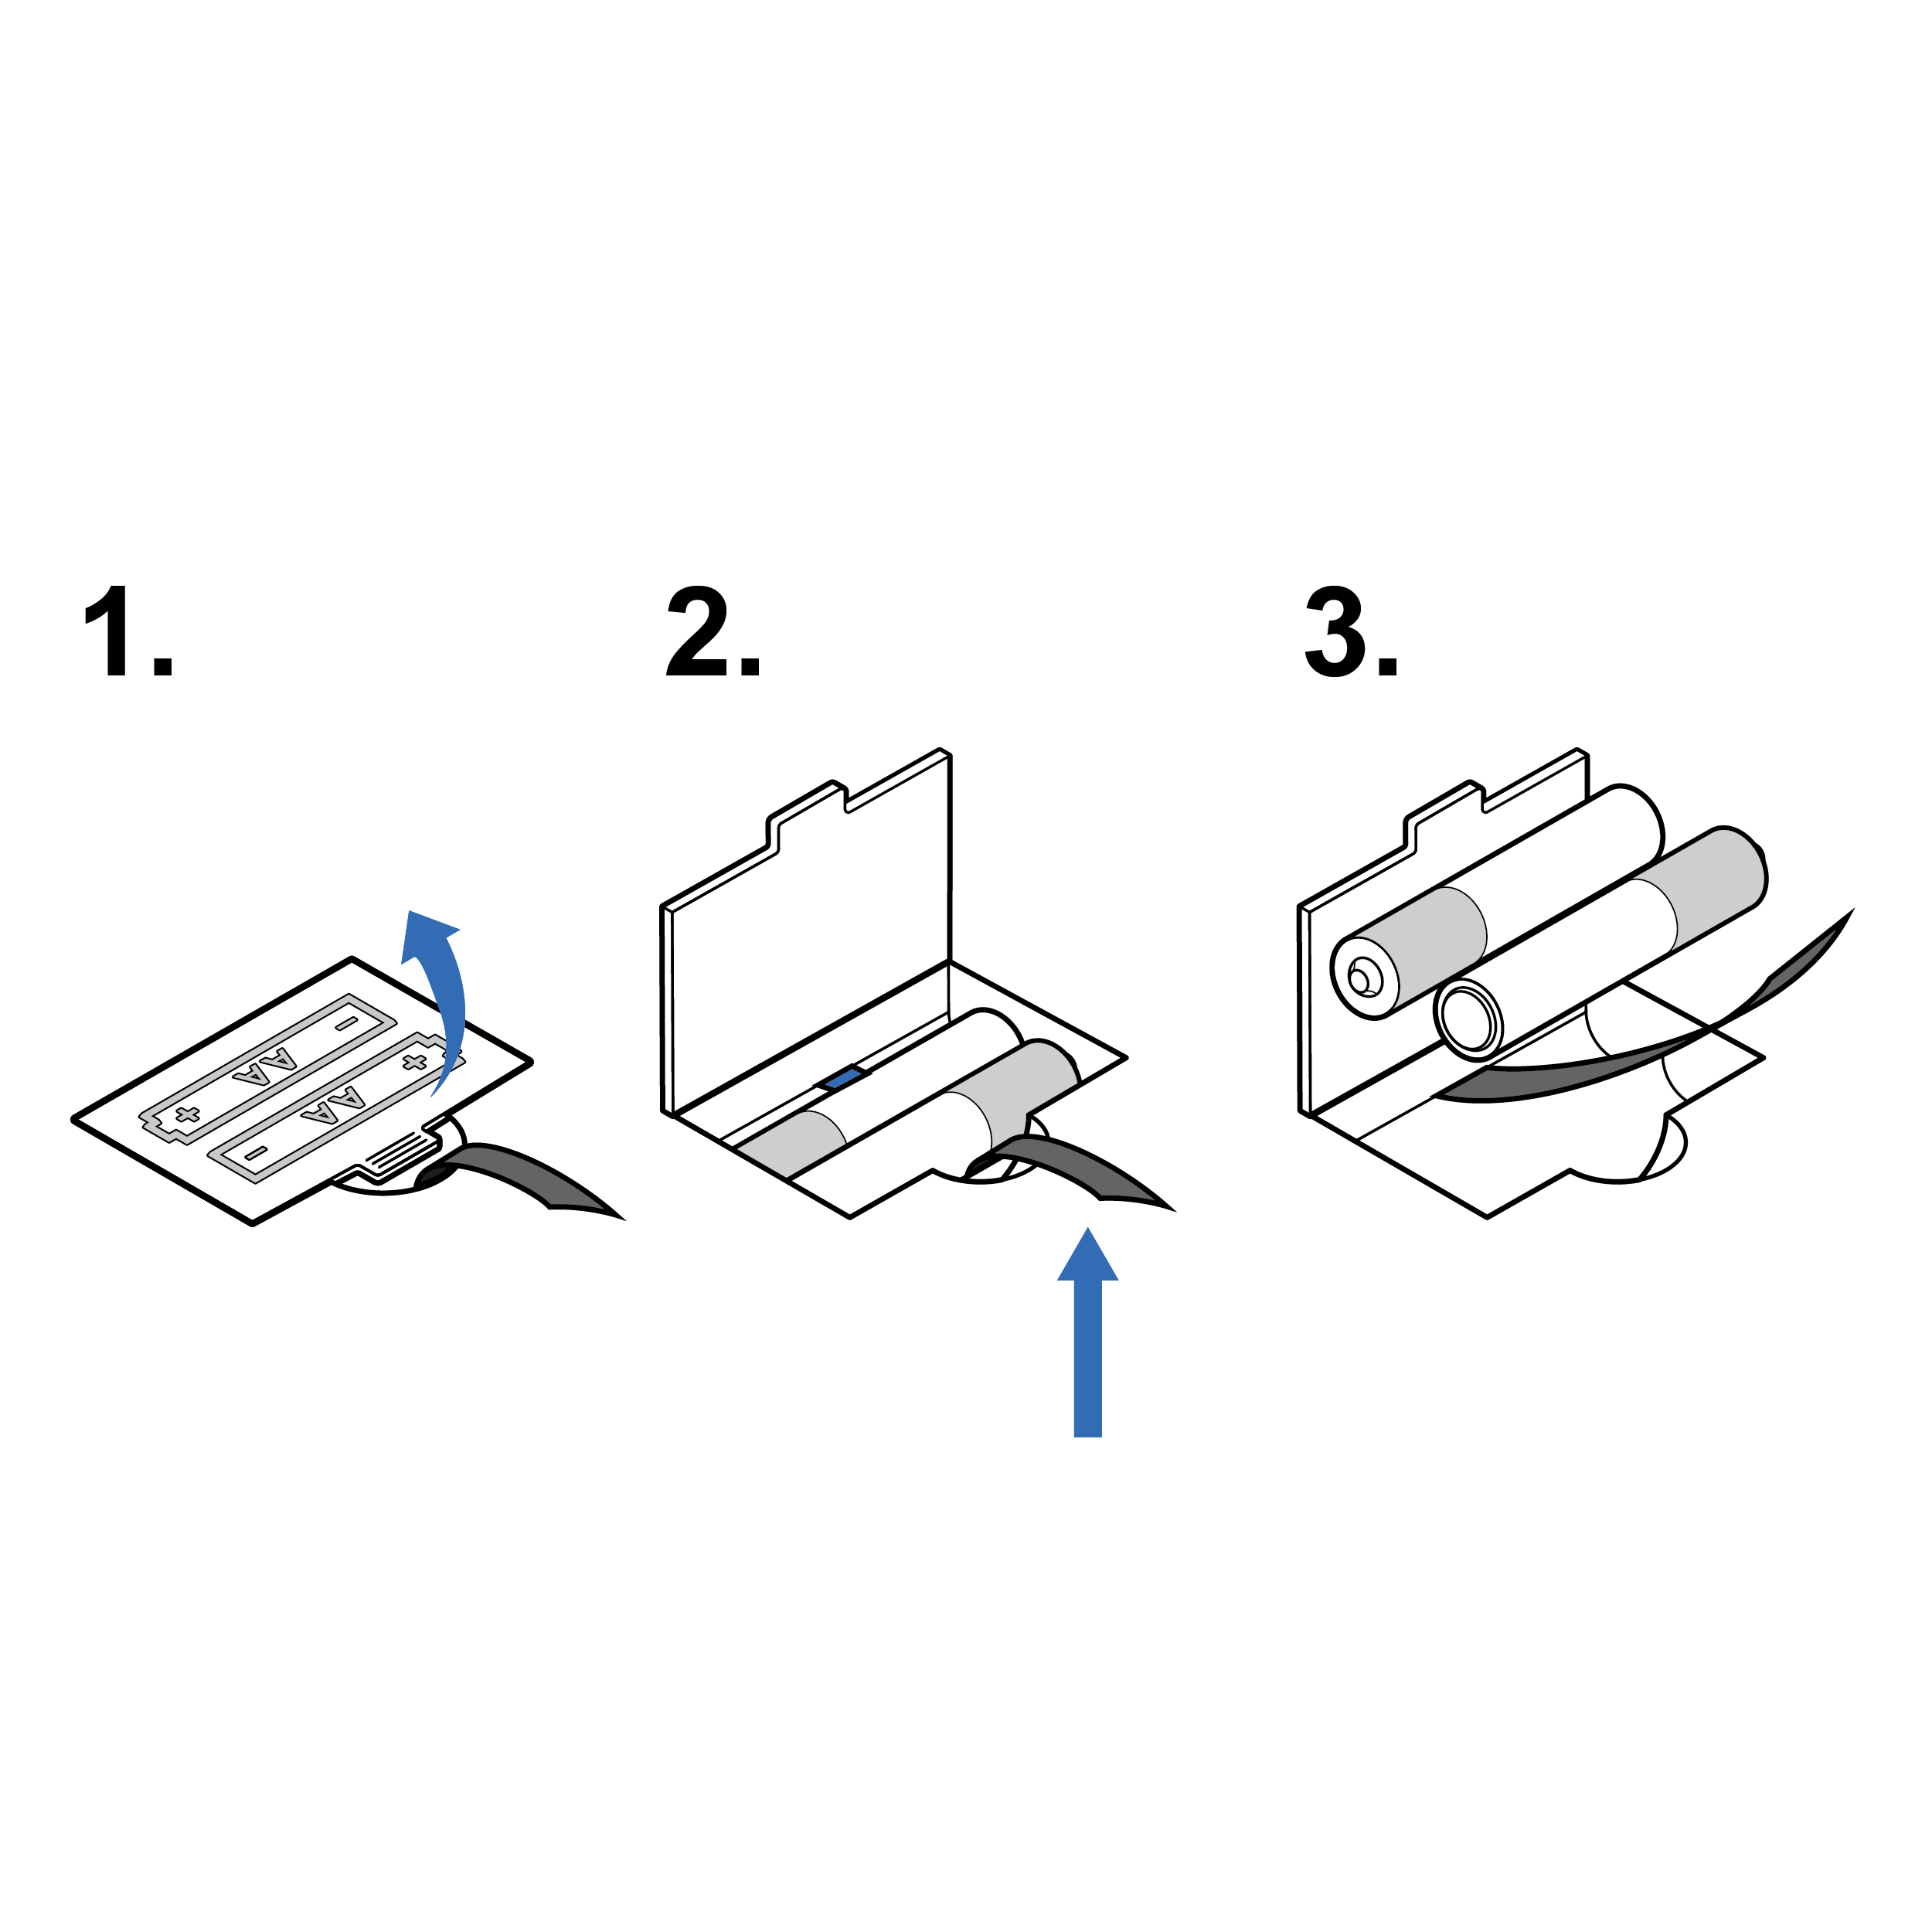 Series of three illustrations showing the battery compartment. The first shows a large opening tab and large divot, allowing finger clearance. An arrow indicates the door opens upward. The second shows the compartment door open, with two batteries laying on top of a ribbon. An arrow indicates the ribbon is pulled upward. The third shows the ribbon pulled taught and the batteries free from the battery compartment.